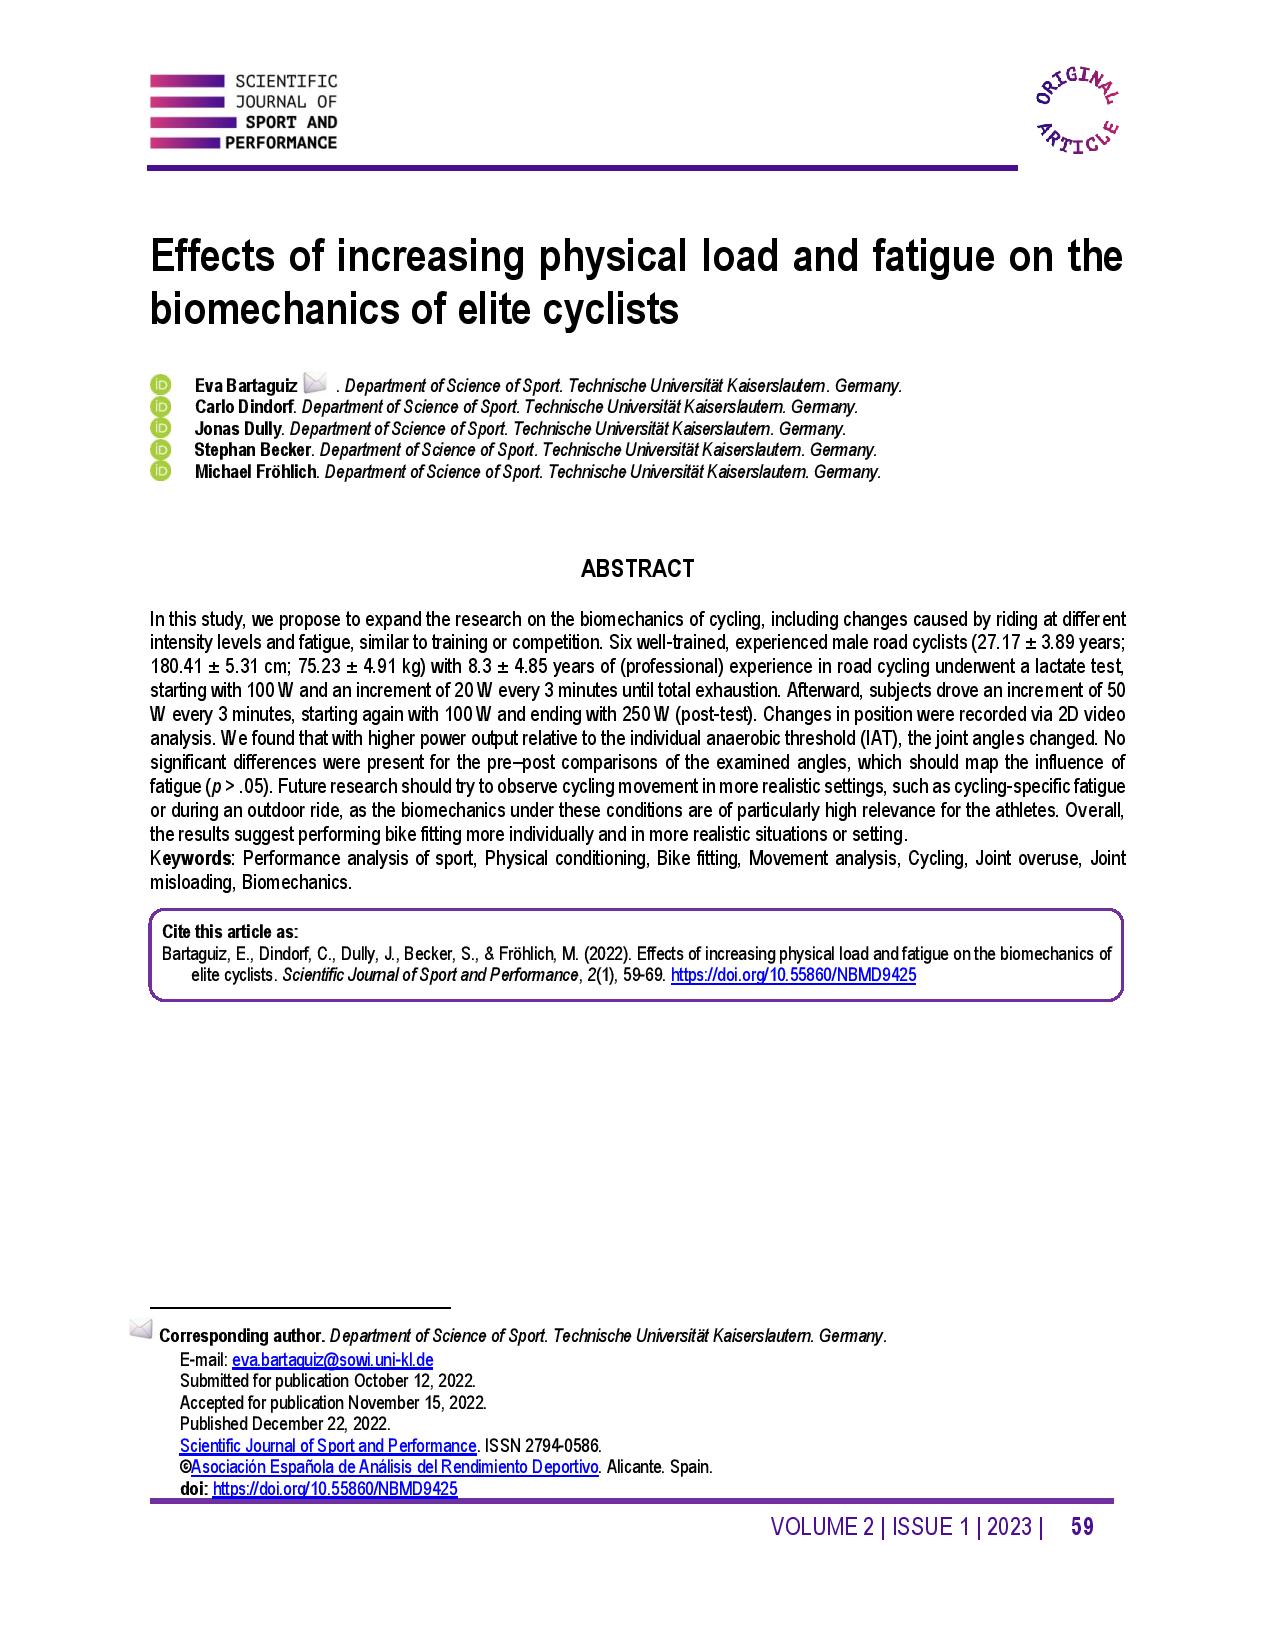 Effects of increasing physical load and fatigue on the biomechanics of elite cyclists